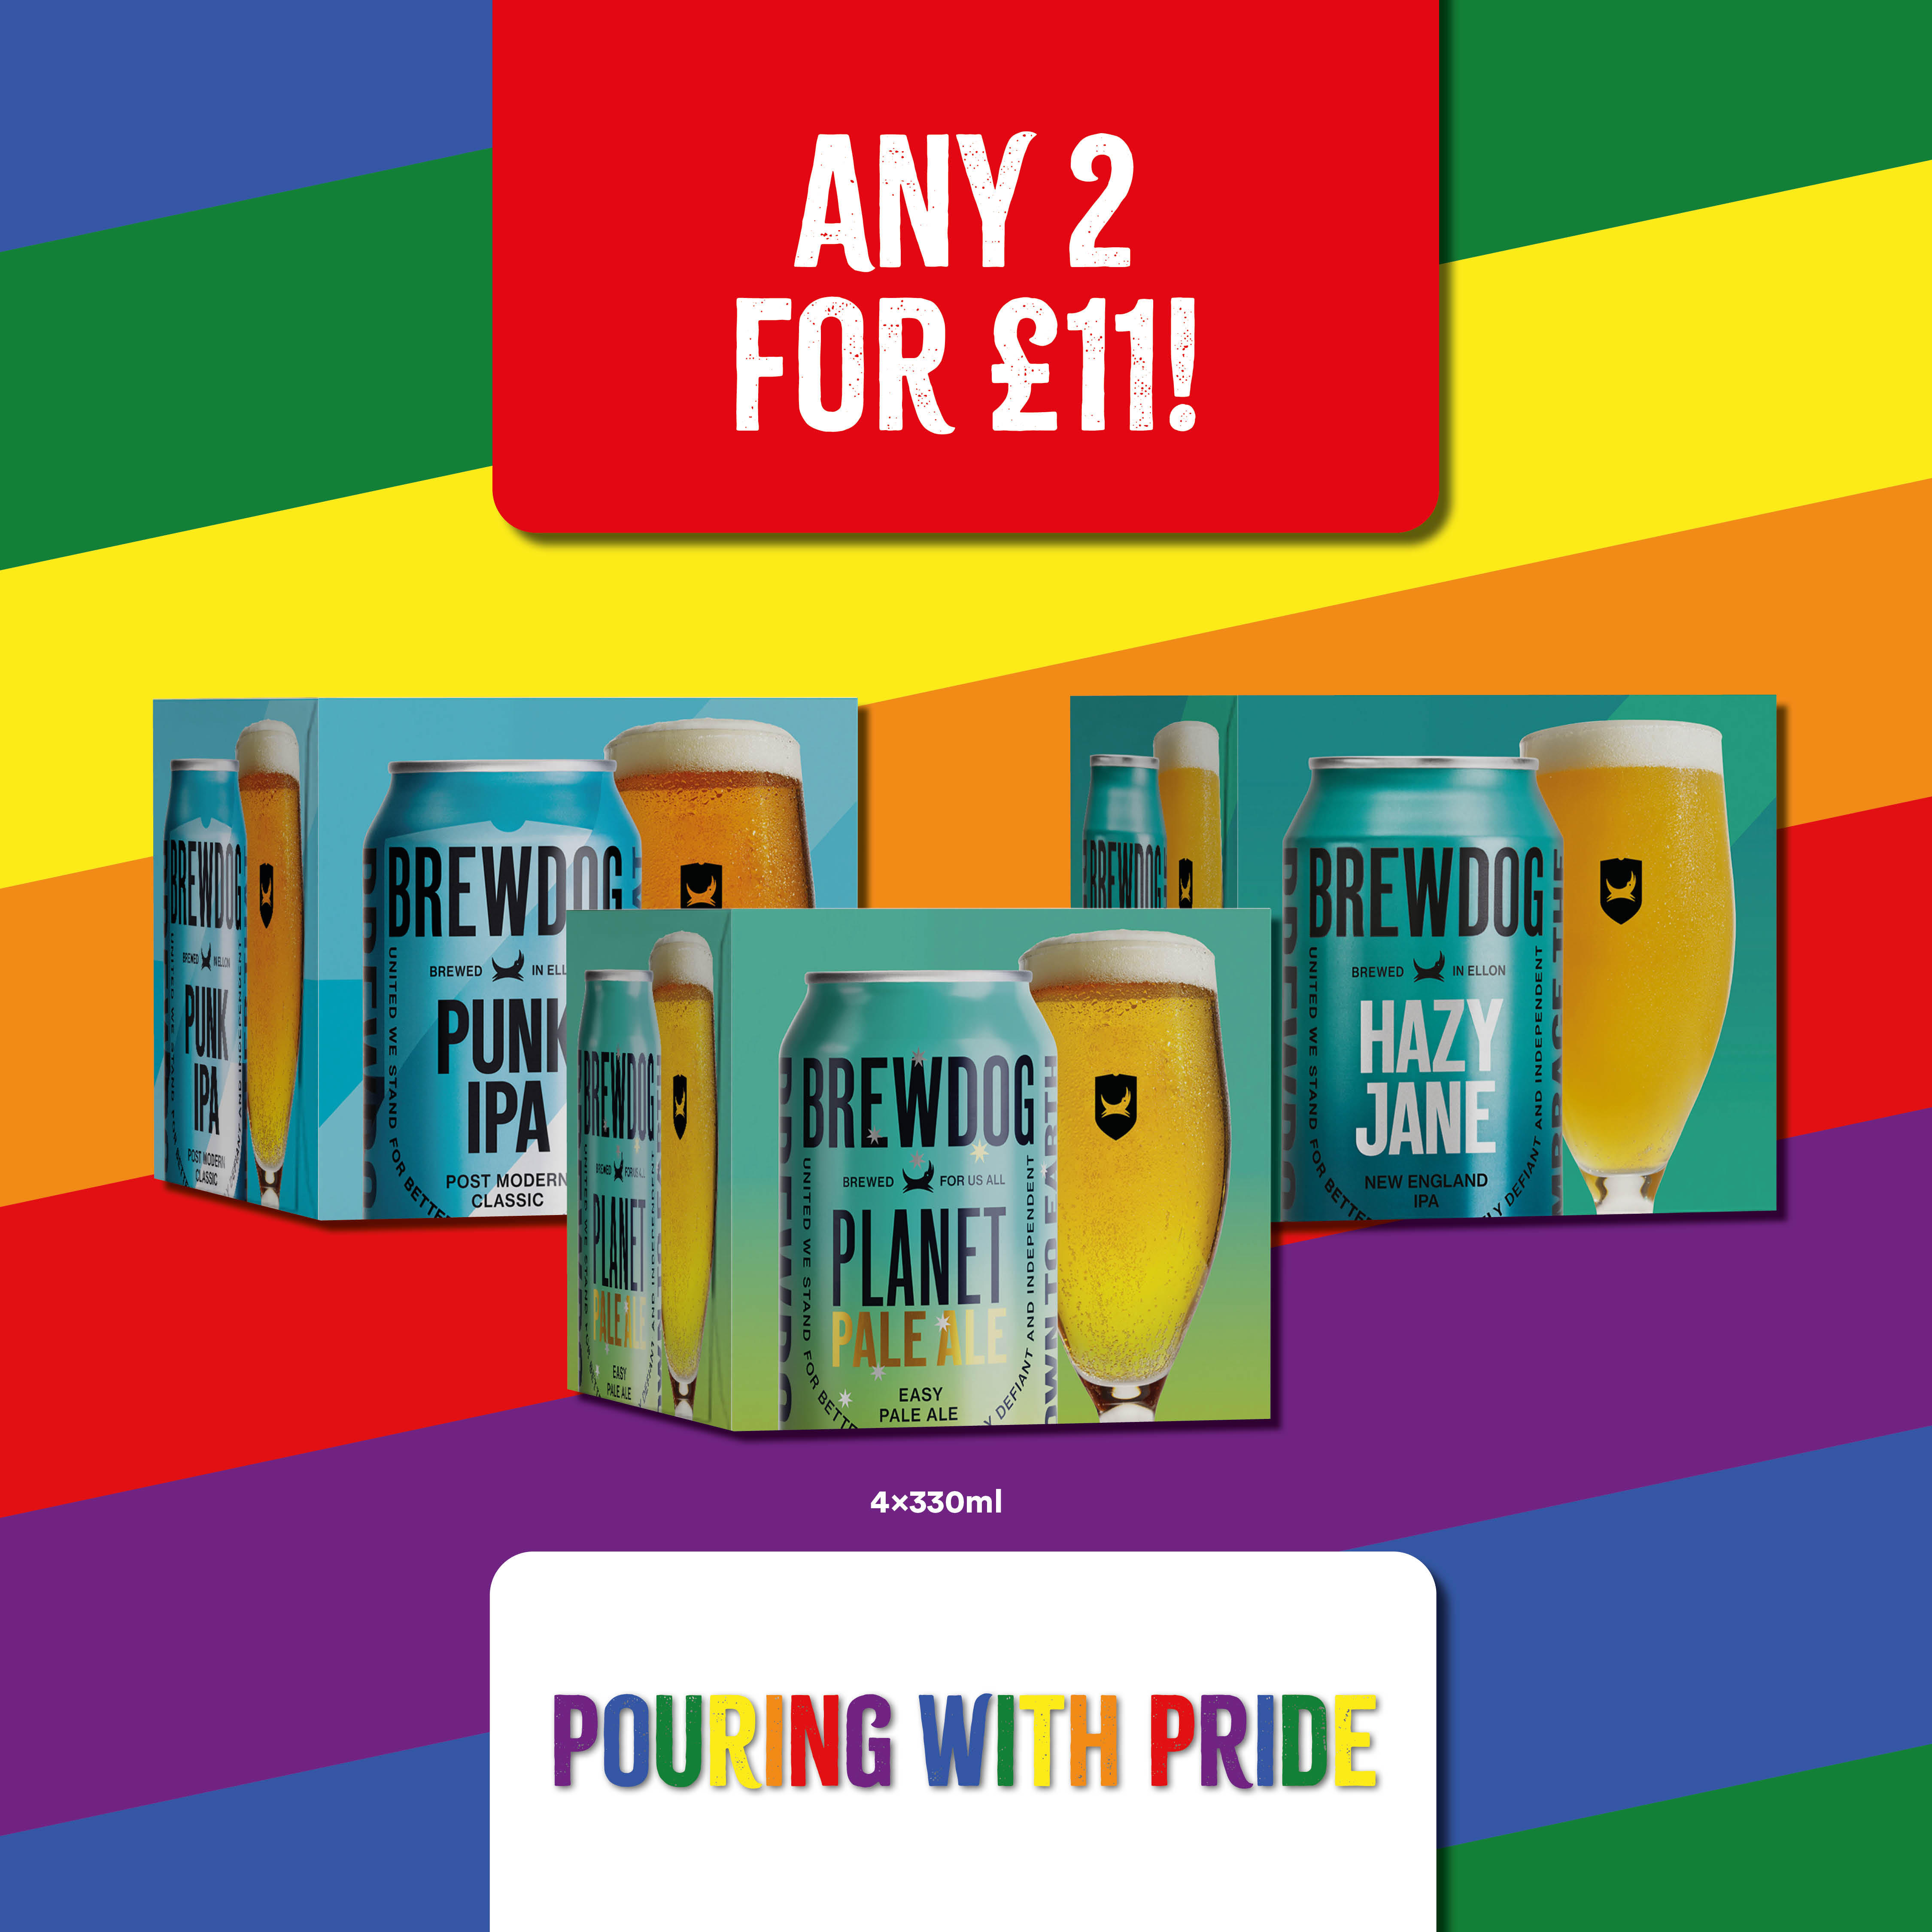 Any 2 for £11 for Brewdog Pink IPA, Planet Pale Ale and Hazy Jane 4 x 330ml. Bargain Booze Whitby 01947 820737